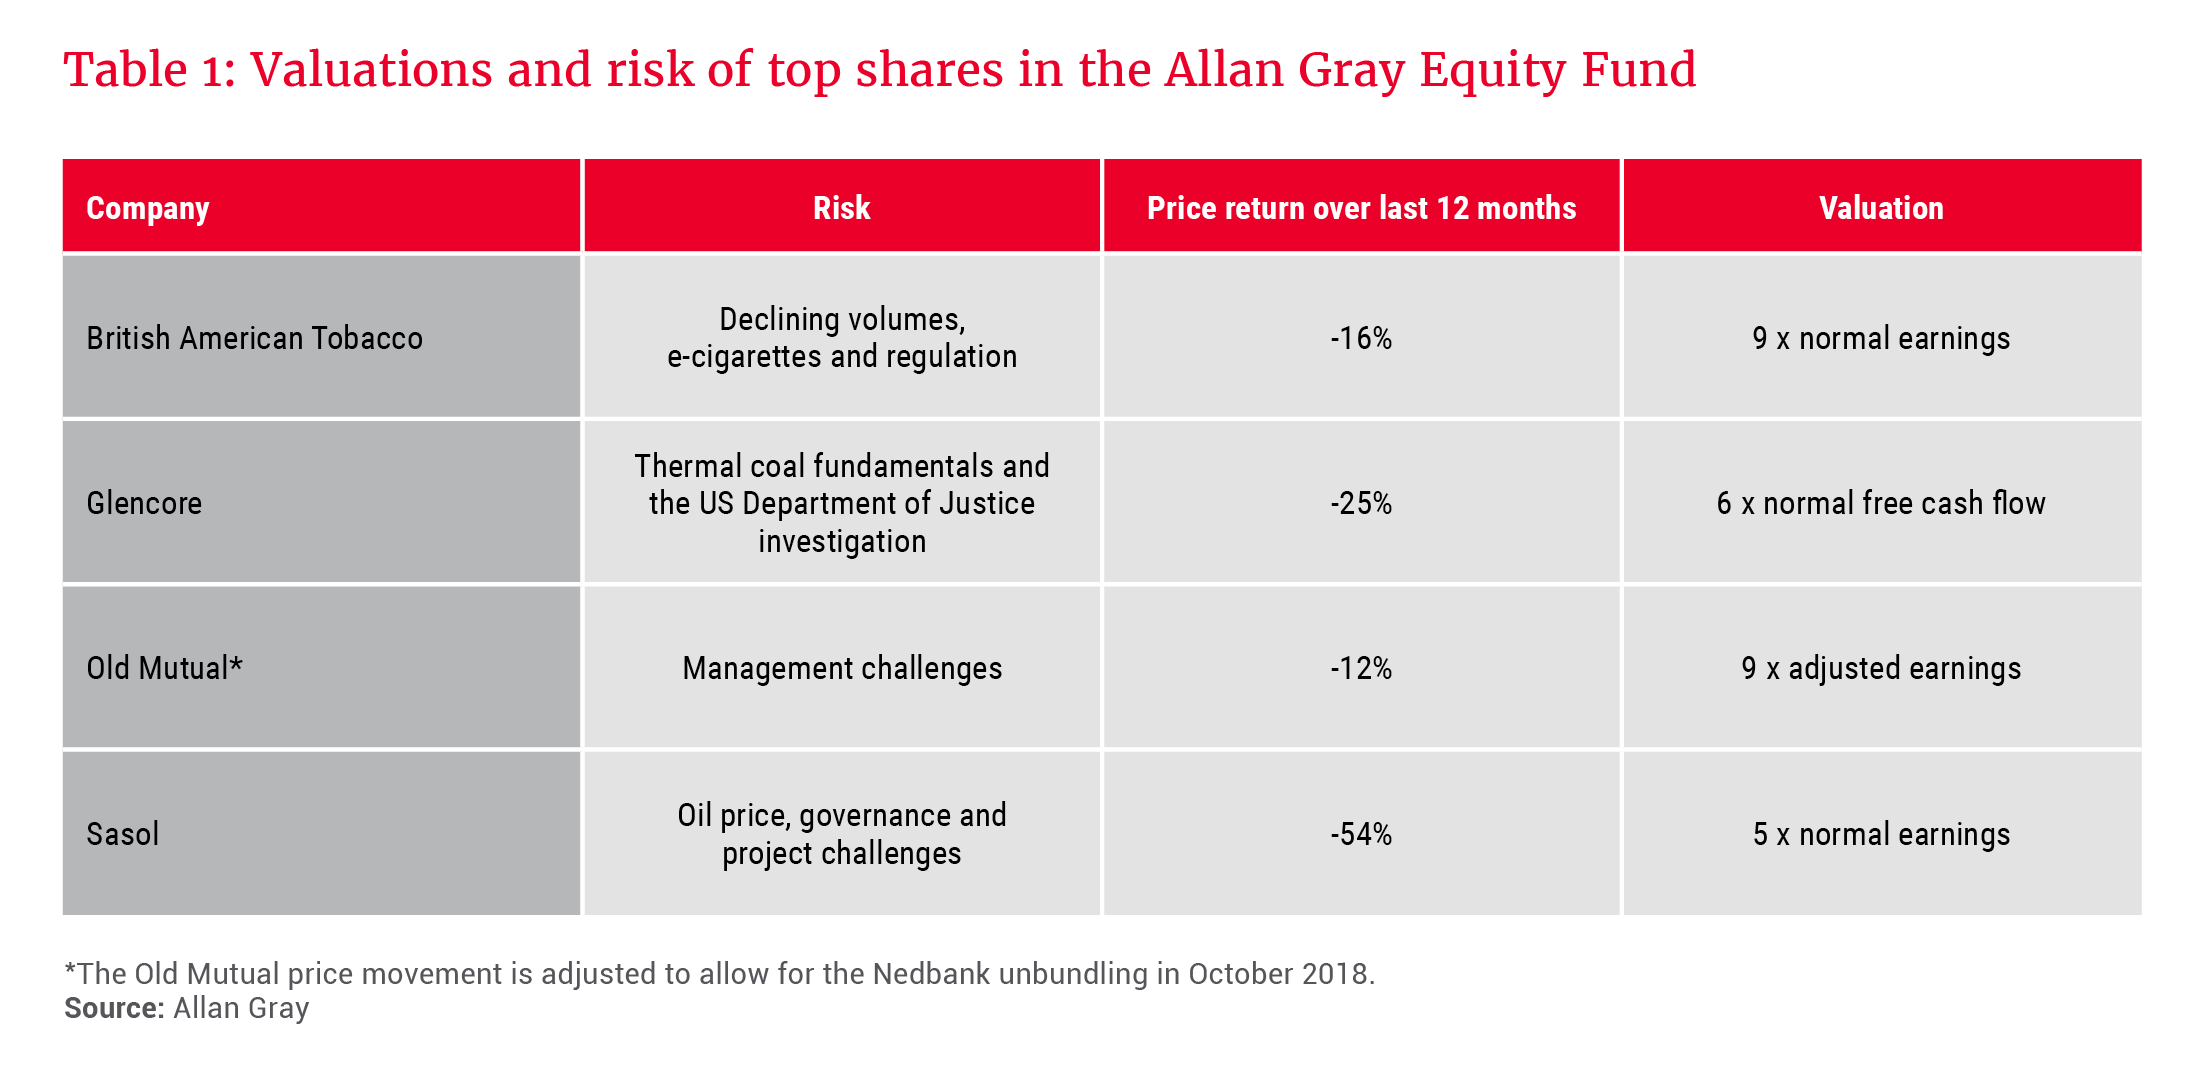 Valuations and risk of top shares in the Allan Gray Equity Fund